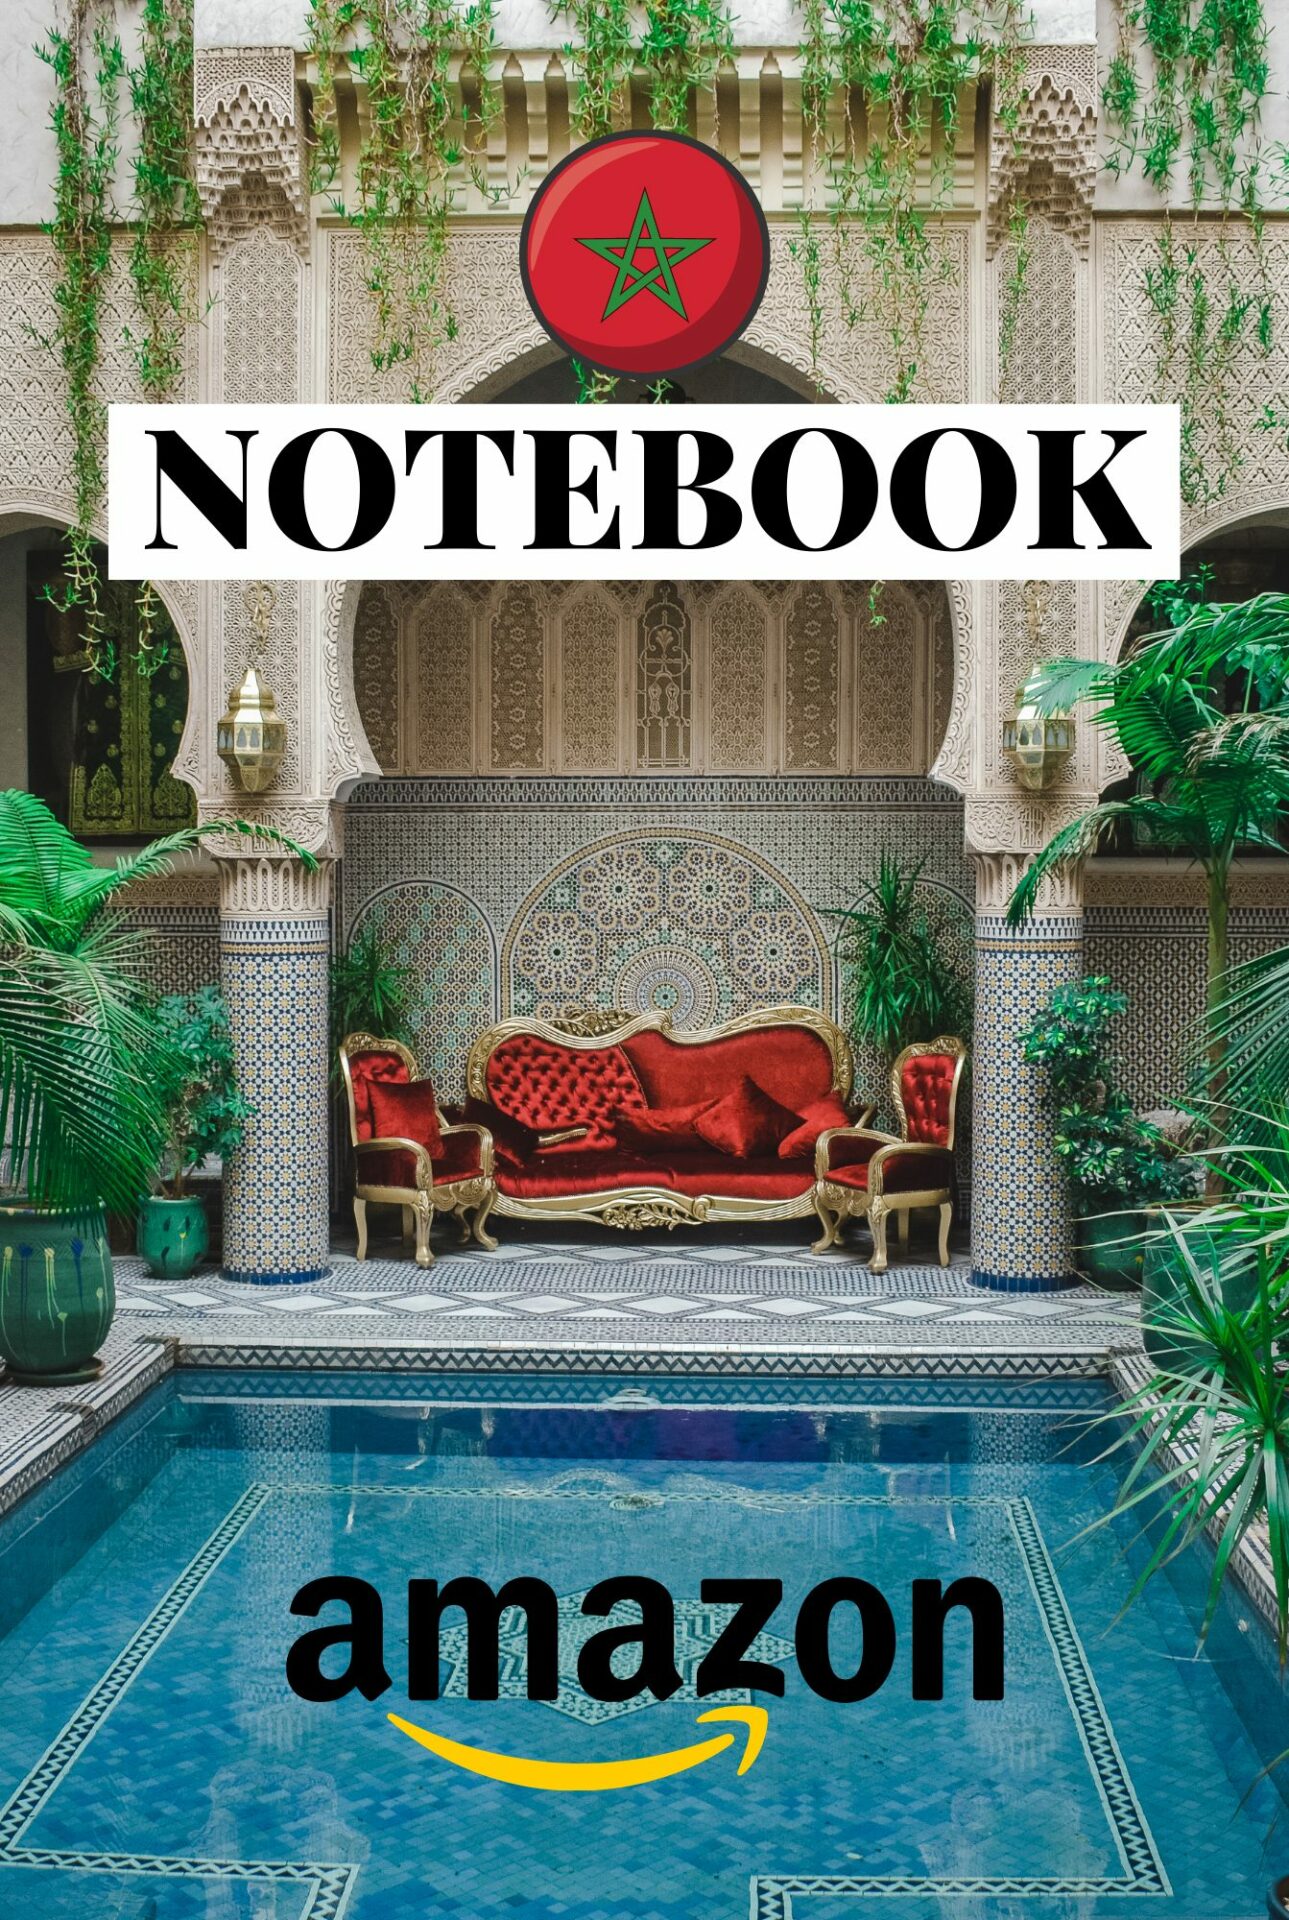 beautiful notebook for morocco lover